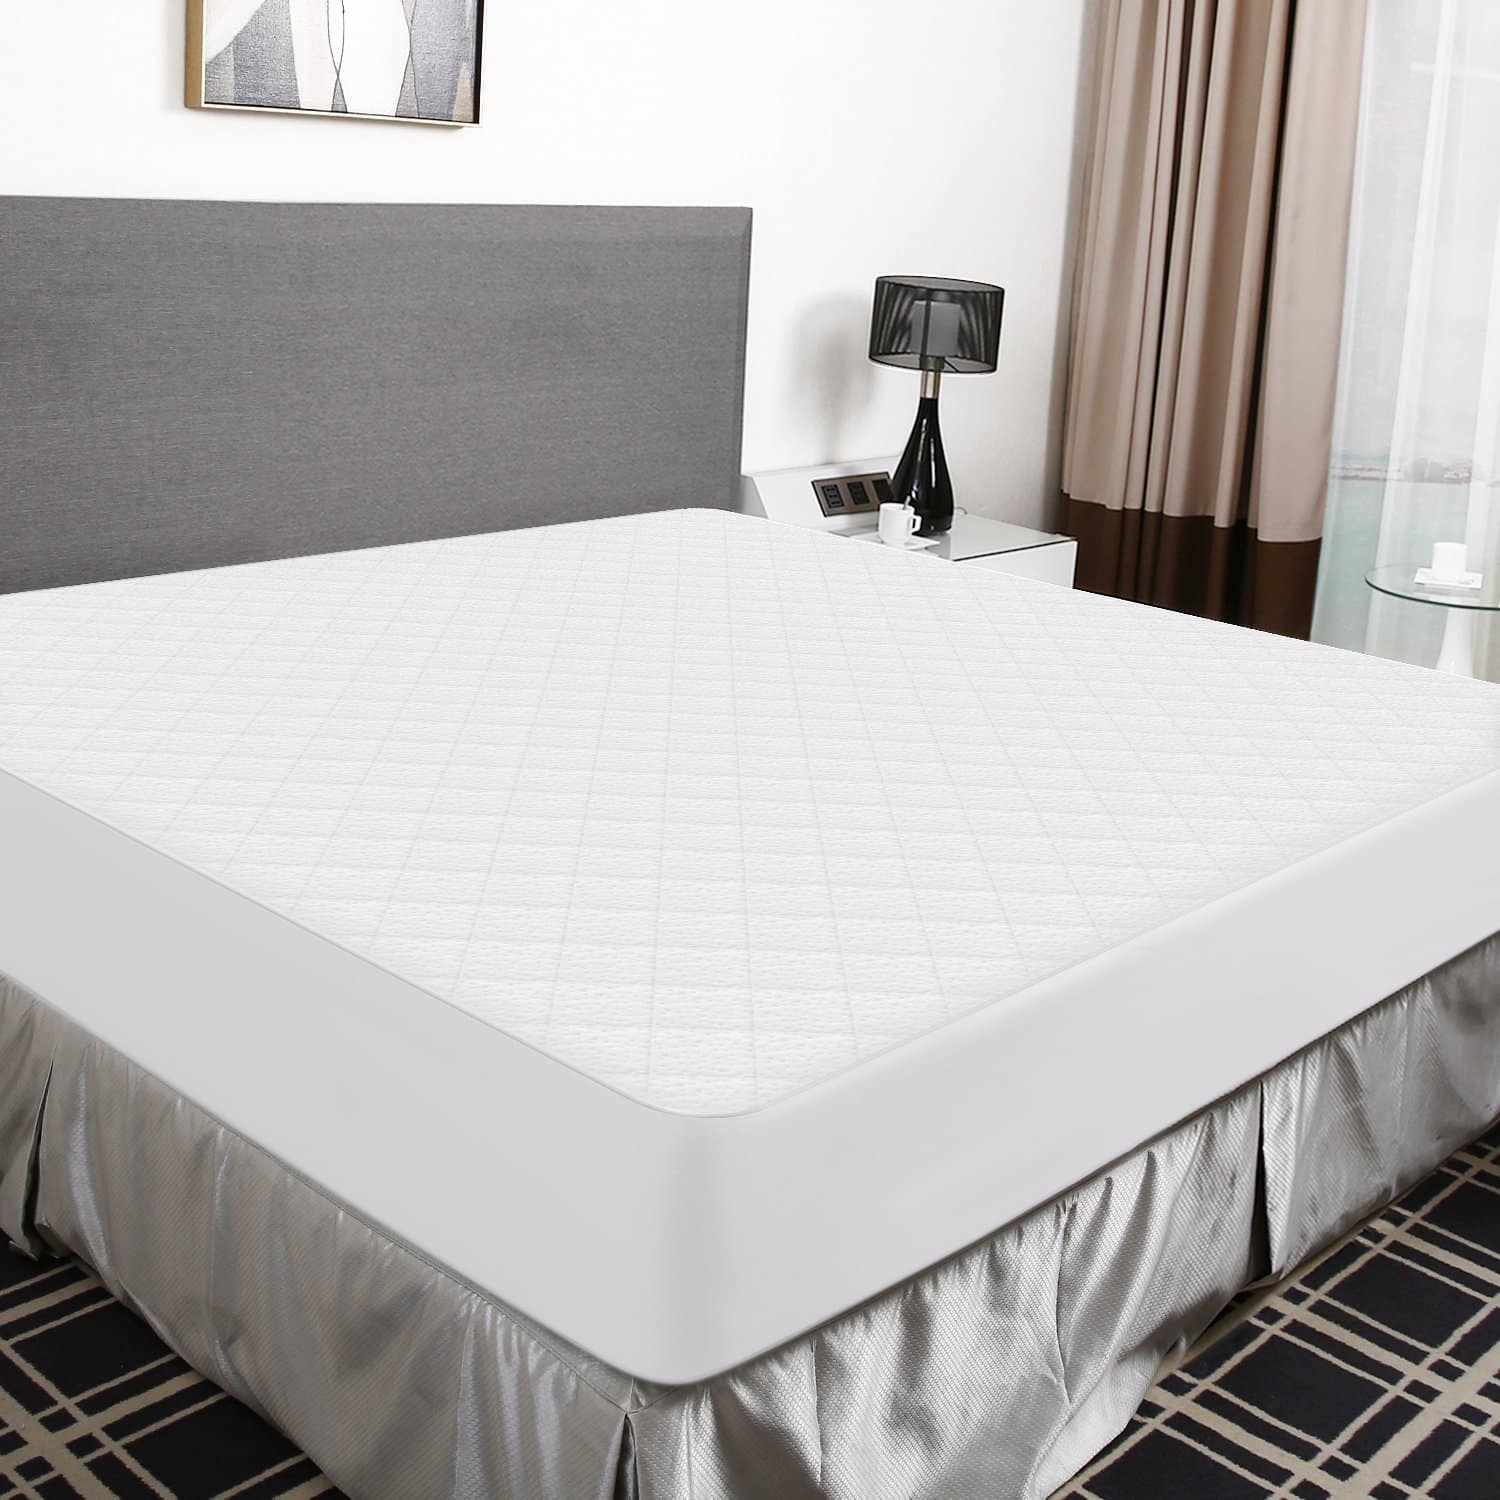 Top 10 Best Mattress Covers in 2020